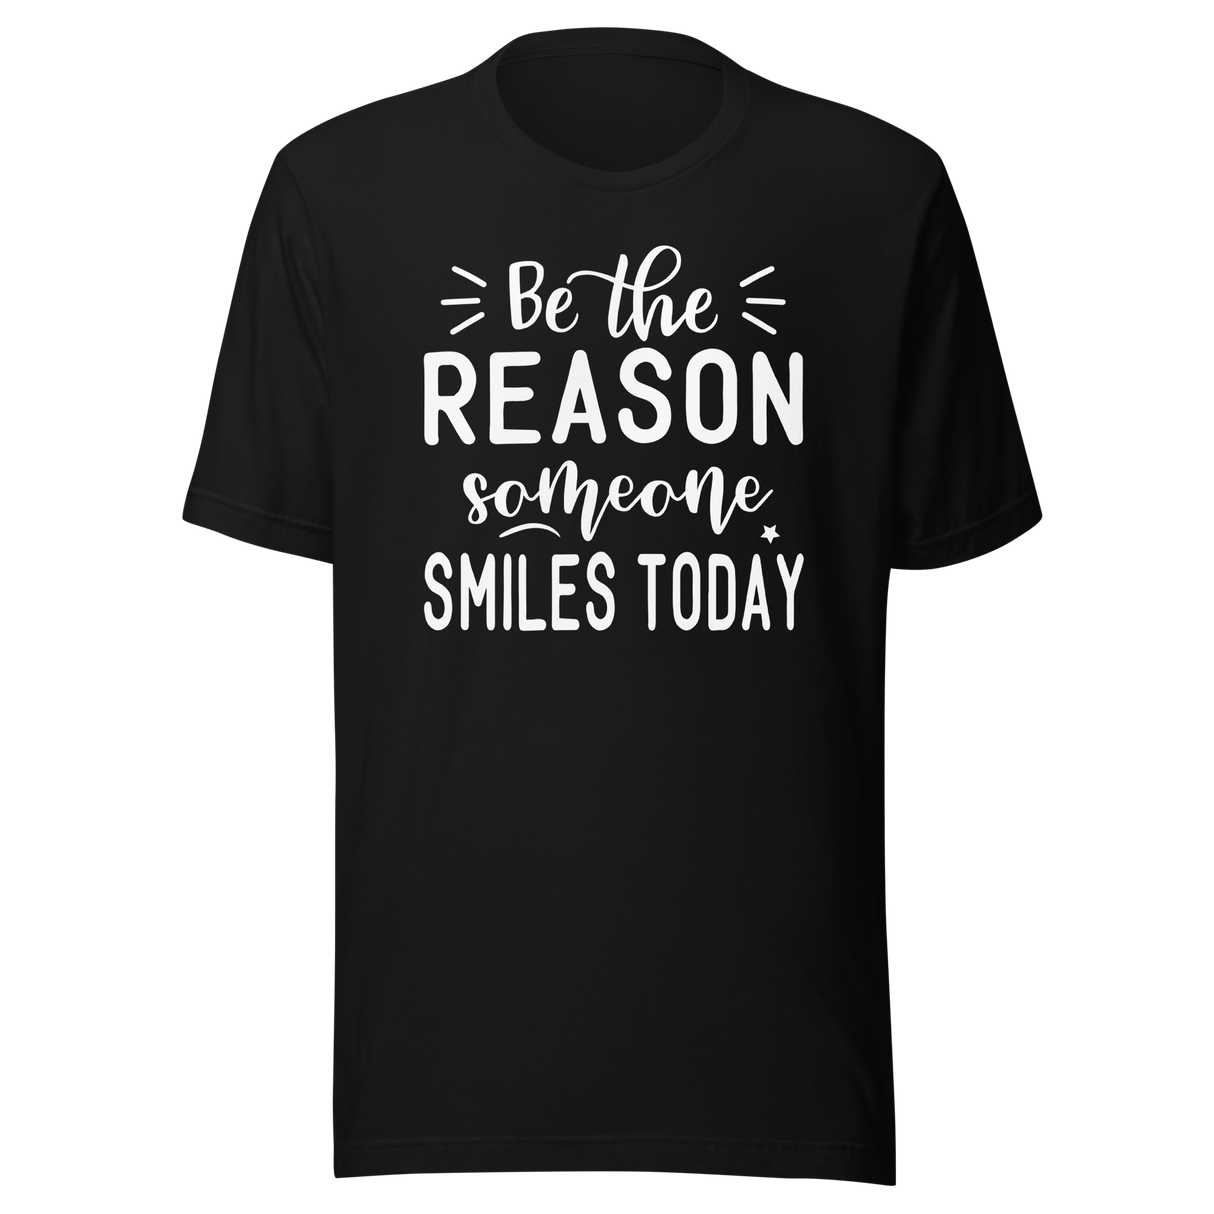 Be The Reason Someone Smiles Today - Life Tee - Motivational T-Shirt - Life Tee - Positivity T-Shirt - Kindness Tee